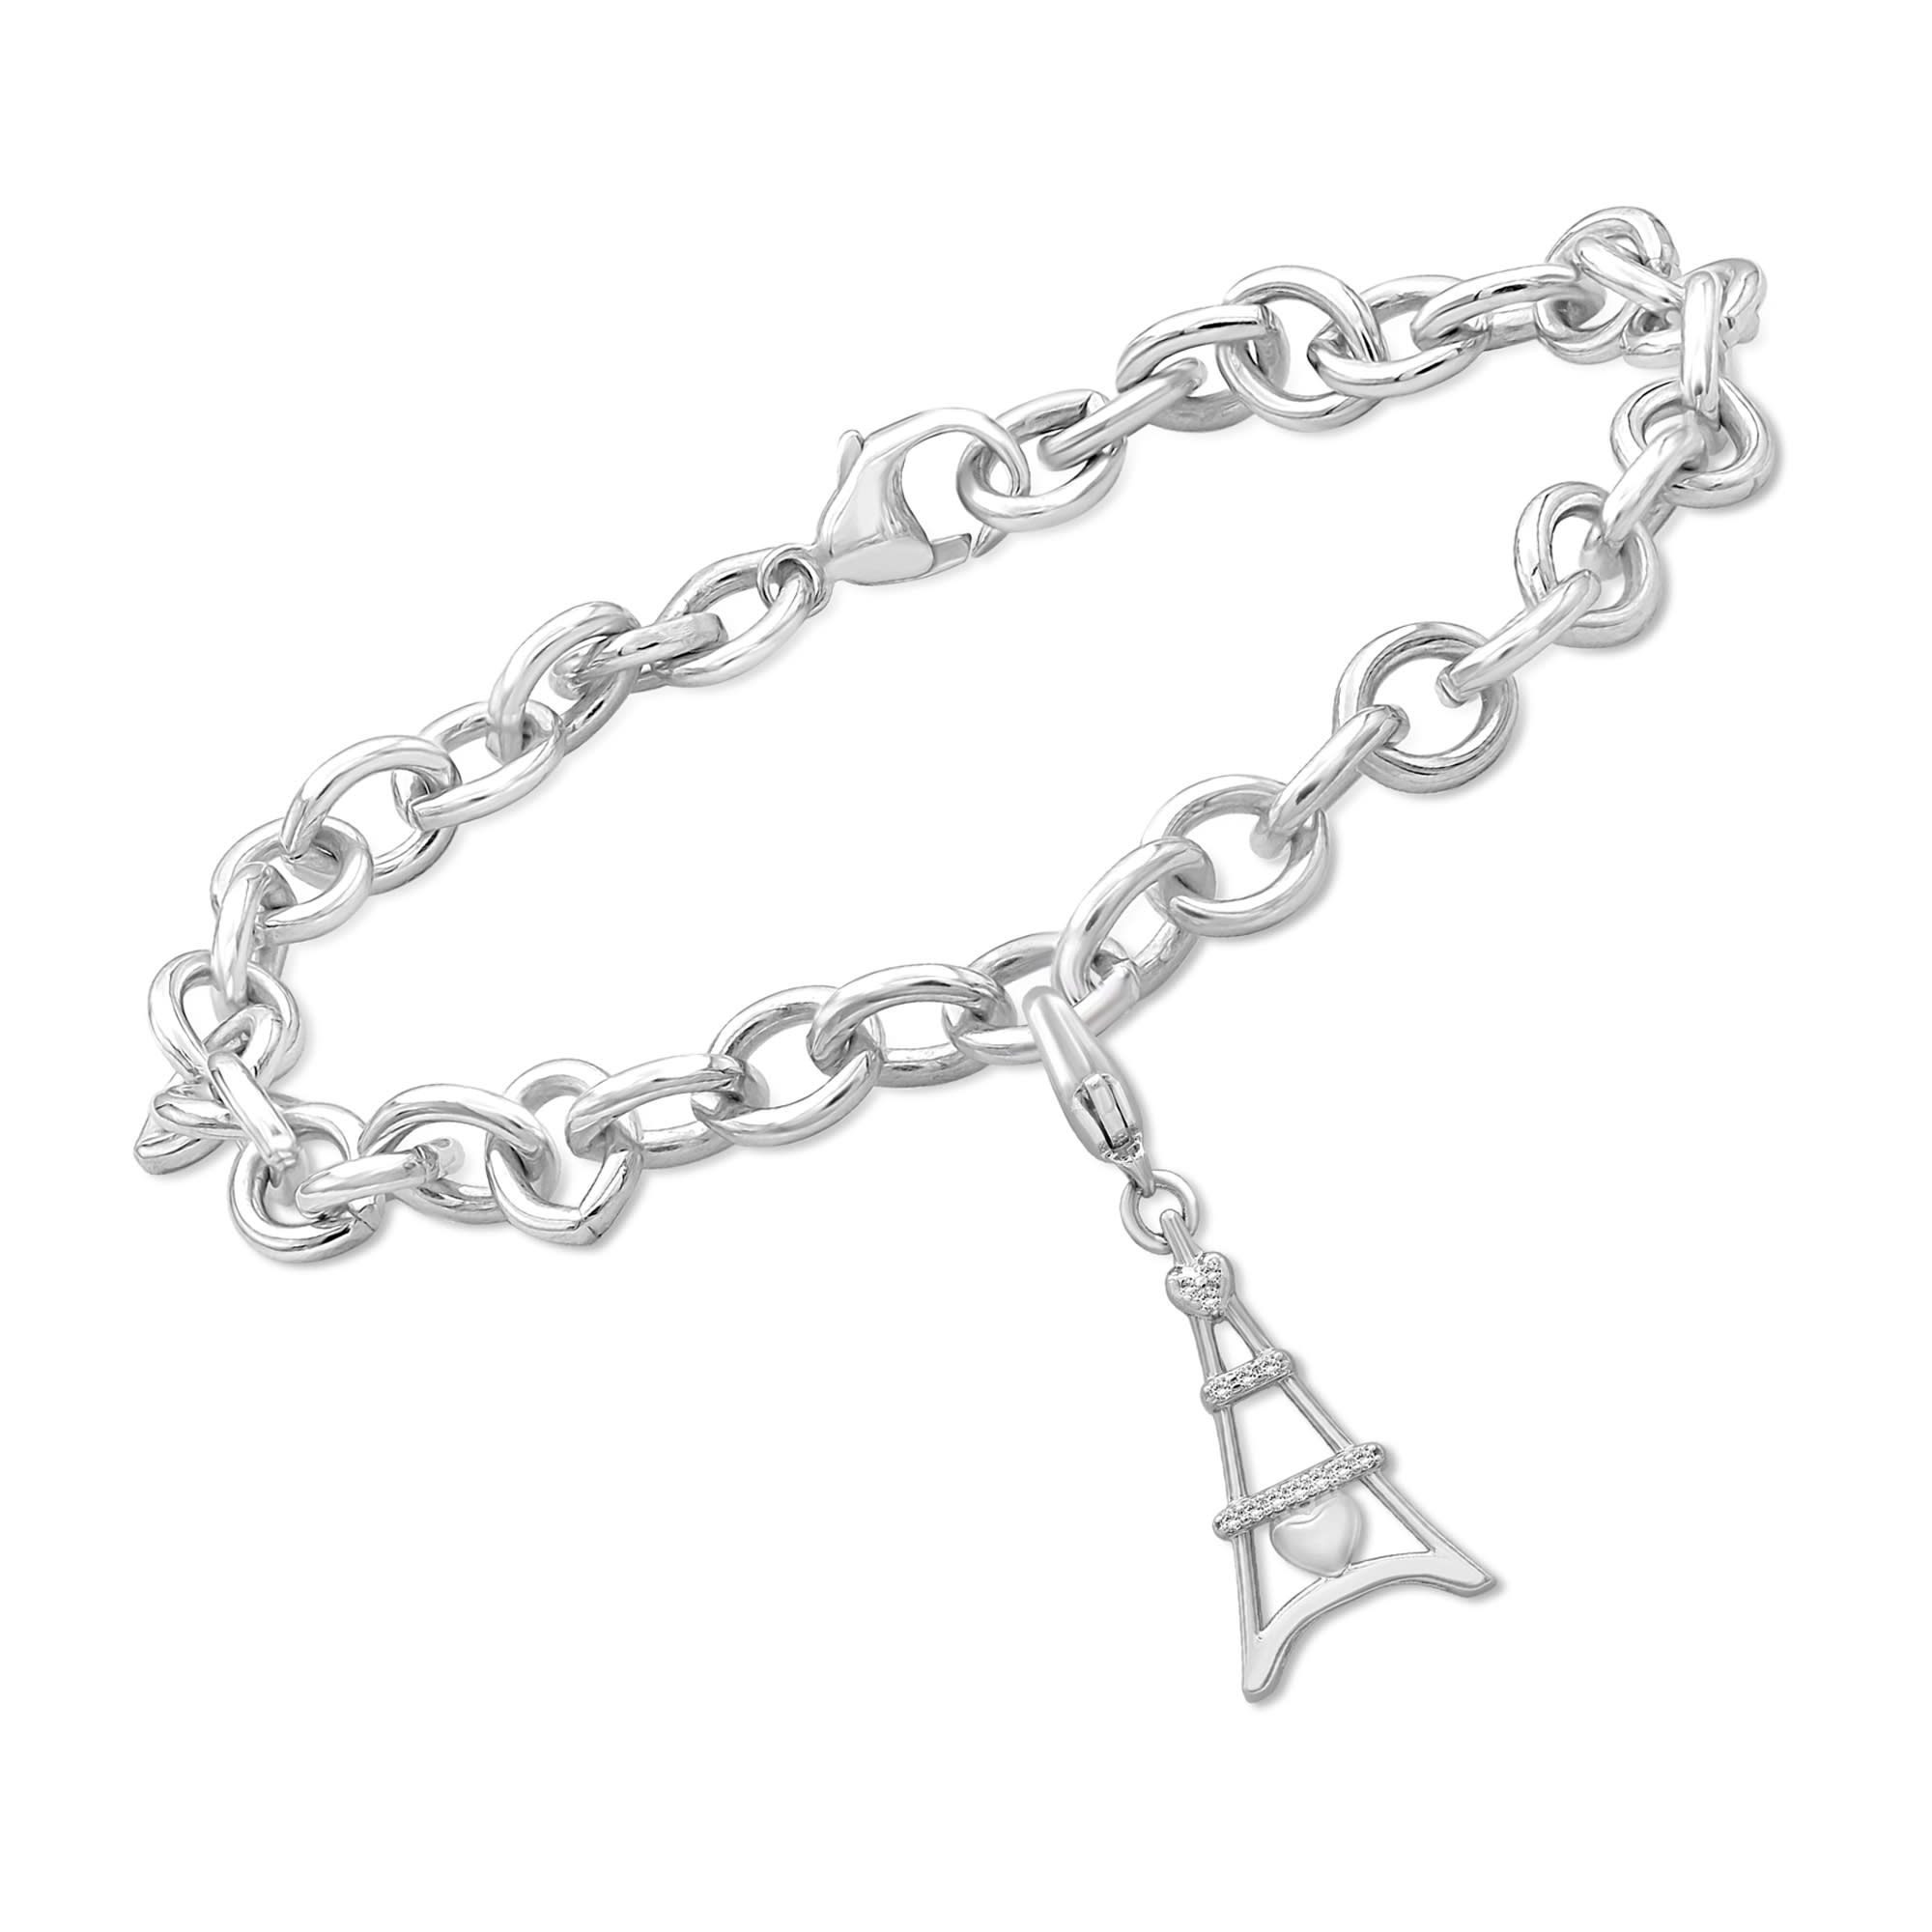 Eiffel Tower Charm Bracelet, Glass Bead Charms, Sterling Silver Glass Beads,  8